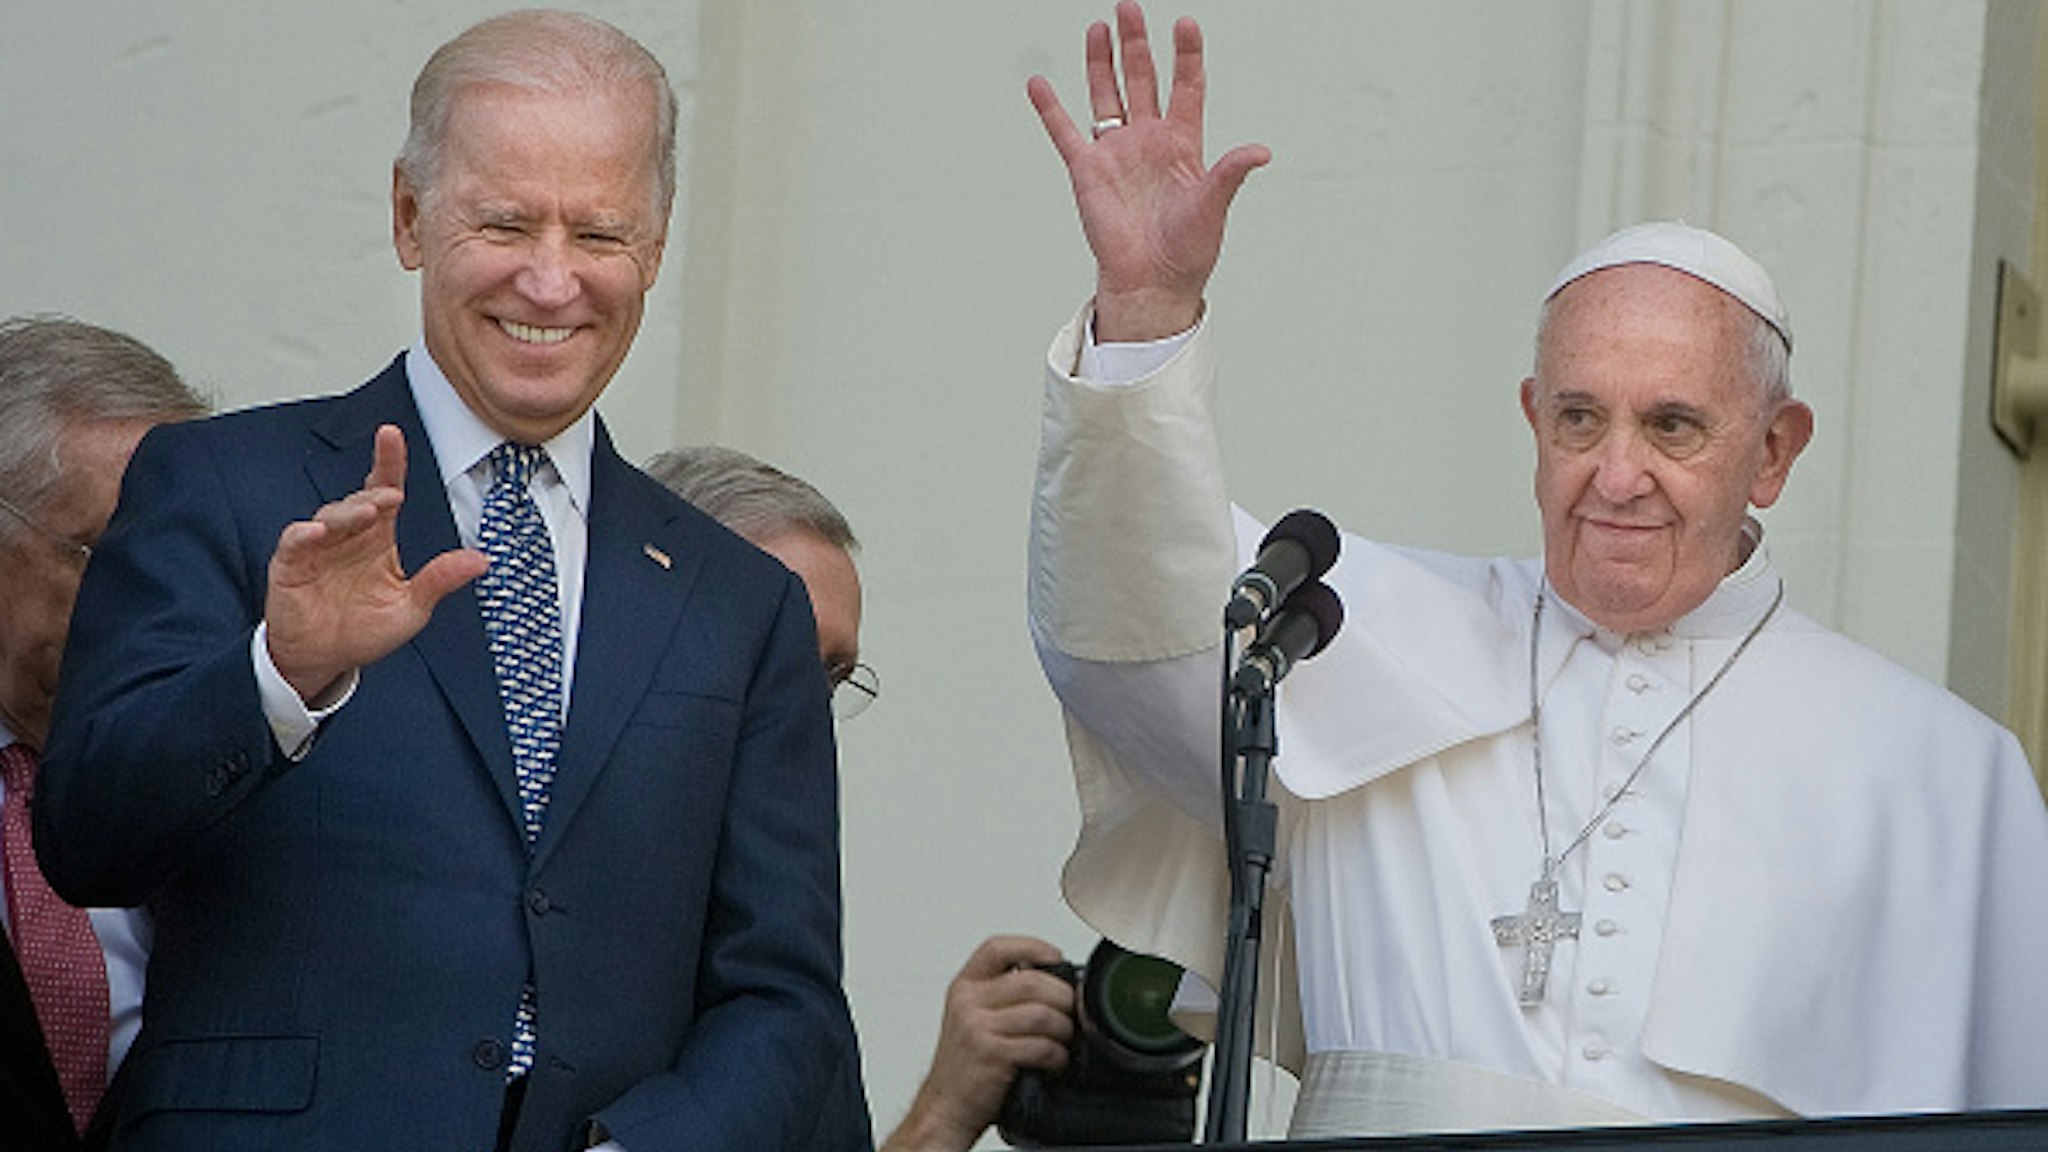 WASHINGTON D.C., CA - SEPTEMBER 24: Pope Francis is joined by Vice President Joseph Biden after addressing Congress on his first U.S. visit. ///ADDITIONAL INFO: - Photo by MINDY SCHAUER, The Orange County Register/MediaNews Group via Getty Images - shot: 092415 pope.ccongress.0925 Pope Francis's adresses the U.S. Congress during his first visit to the U.S. He talked about love, tolerance and immigration.